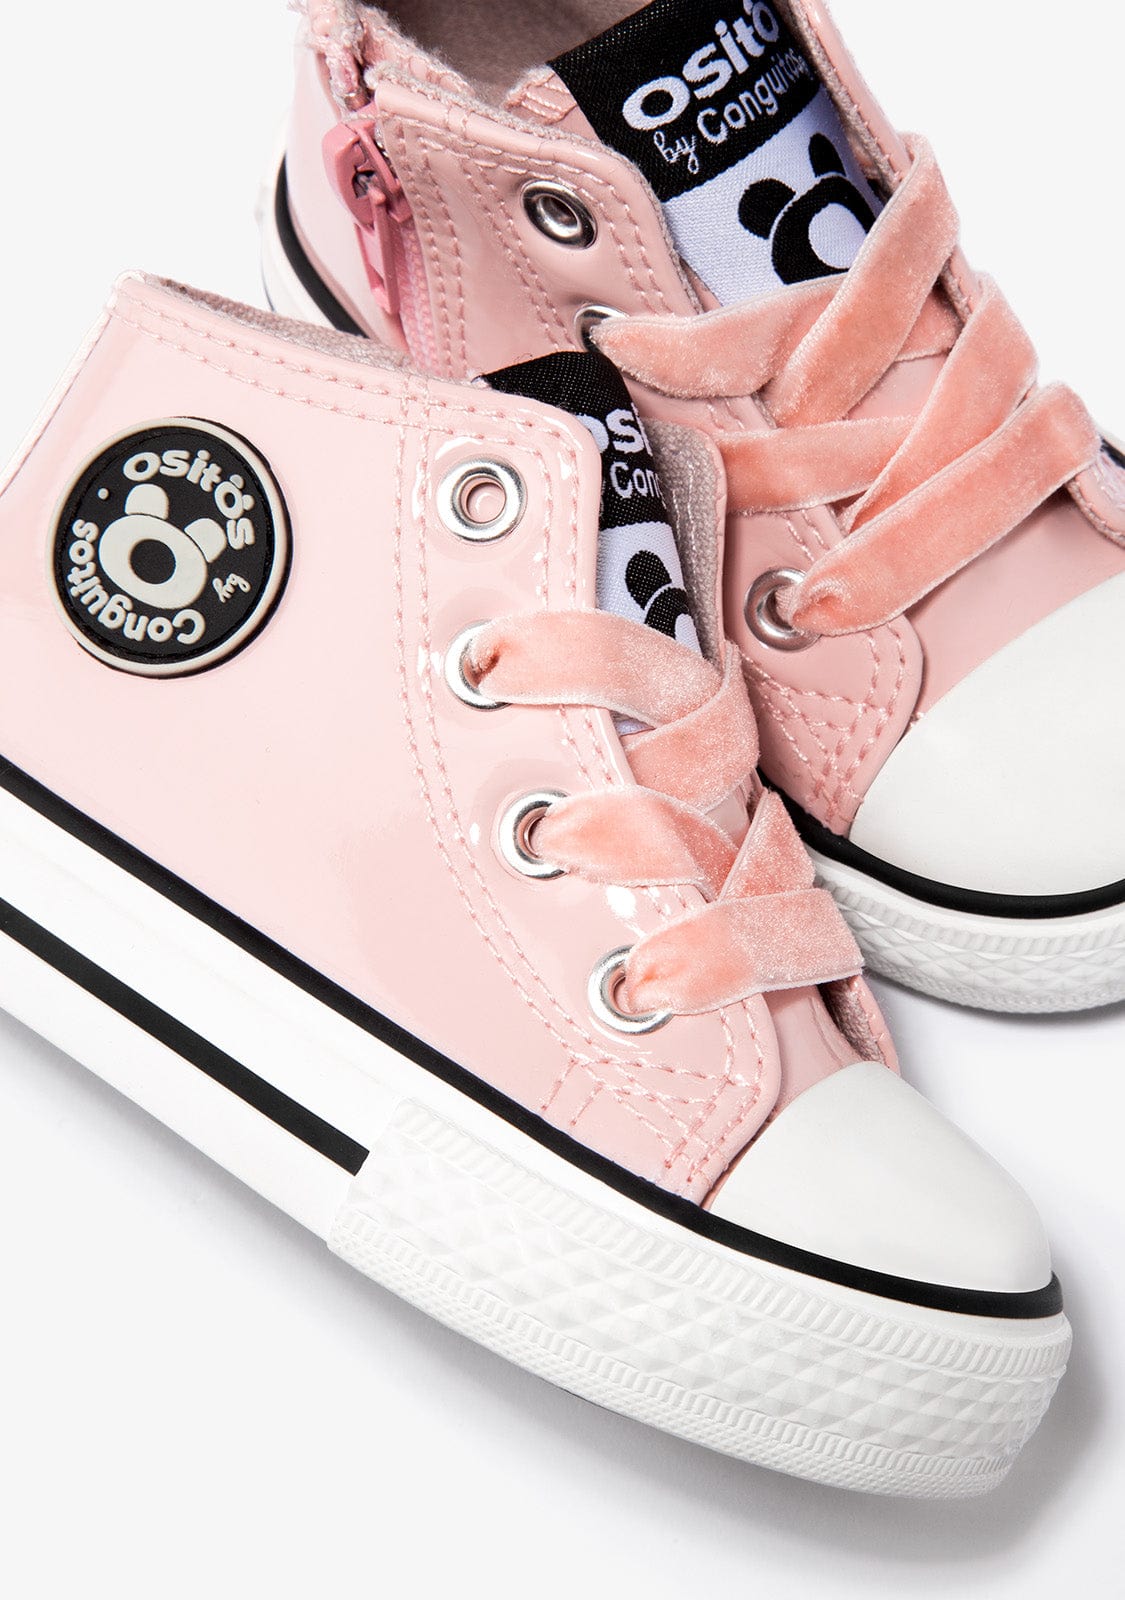 OSITO Shoes Baby's Pink Patent Leather Hi-Top Sneakers